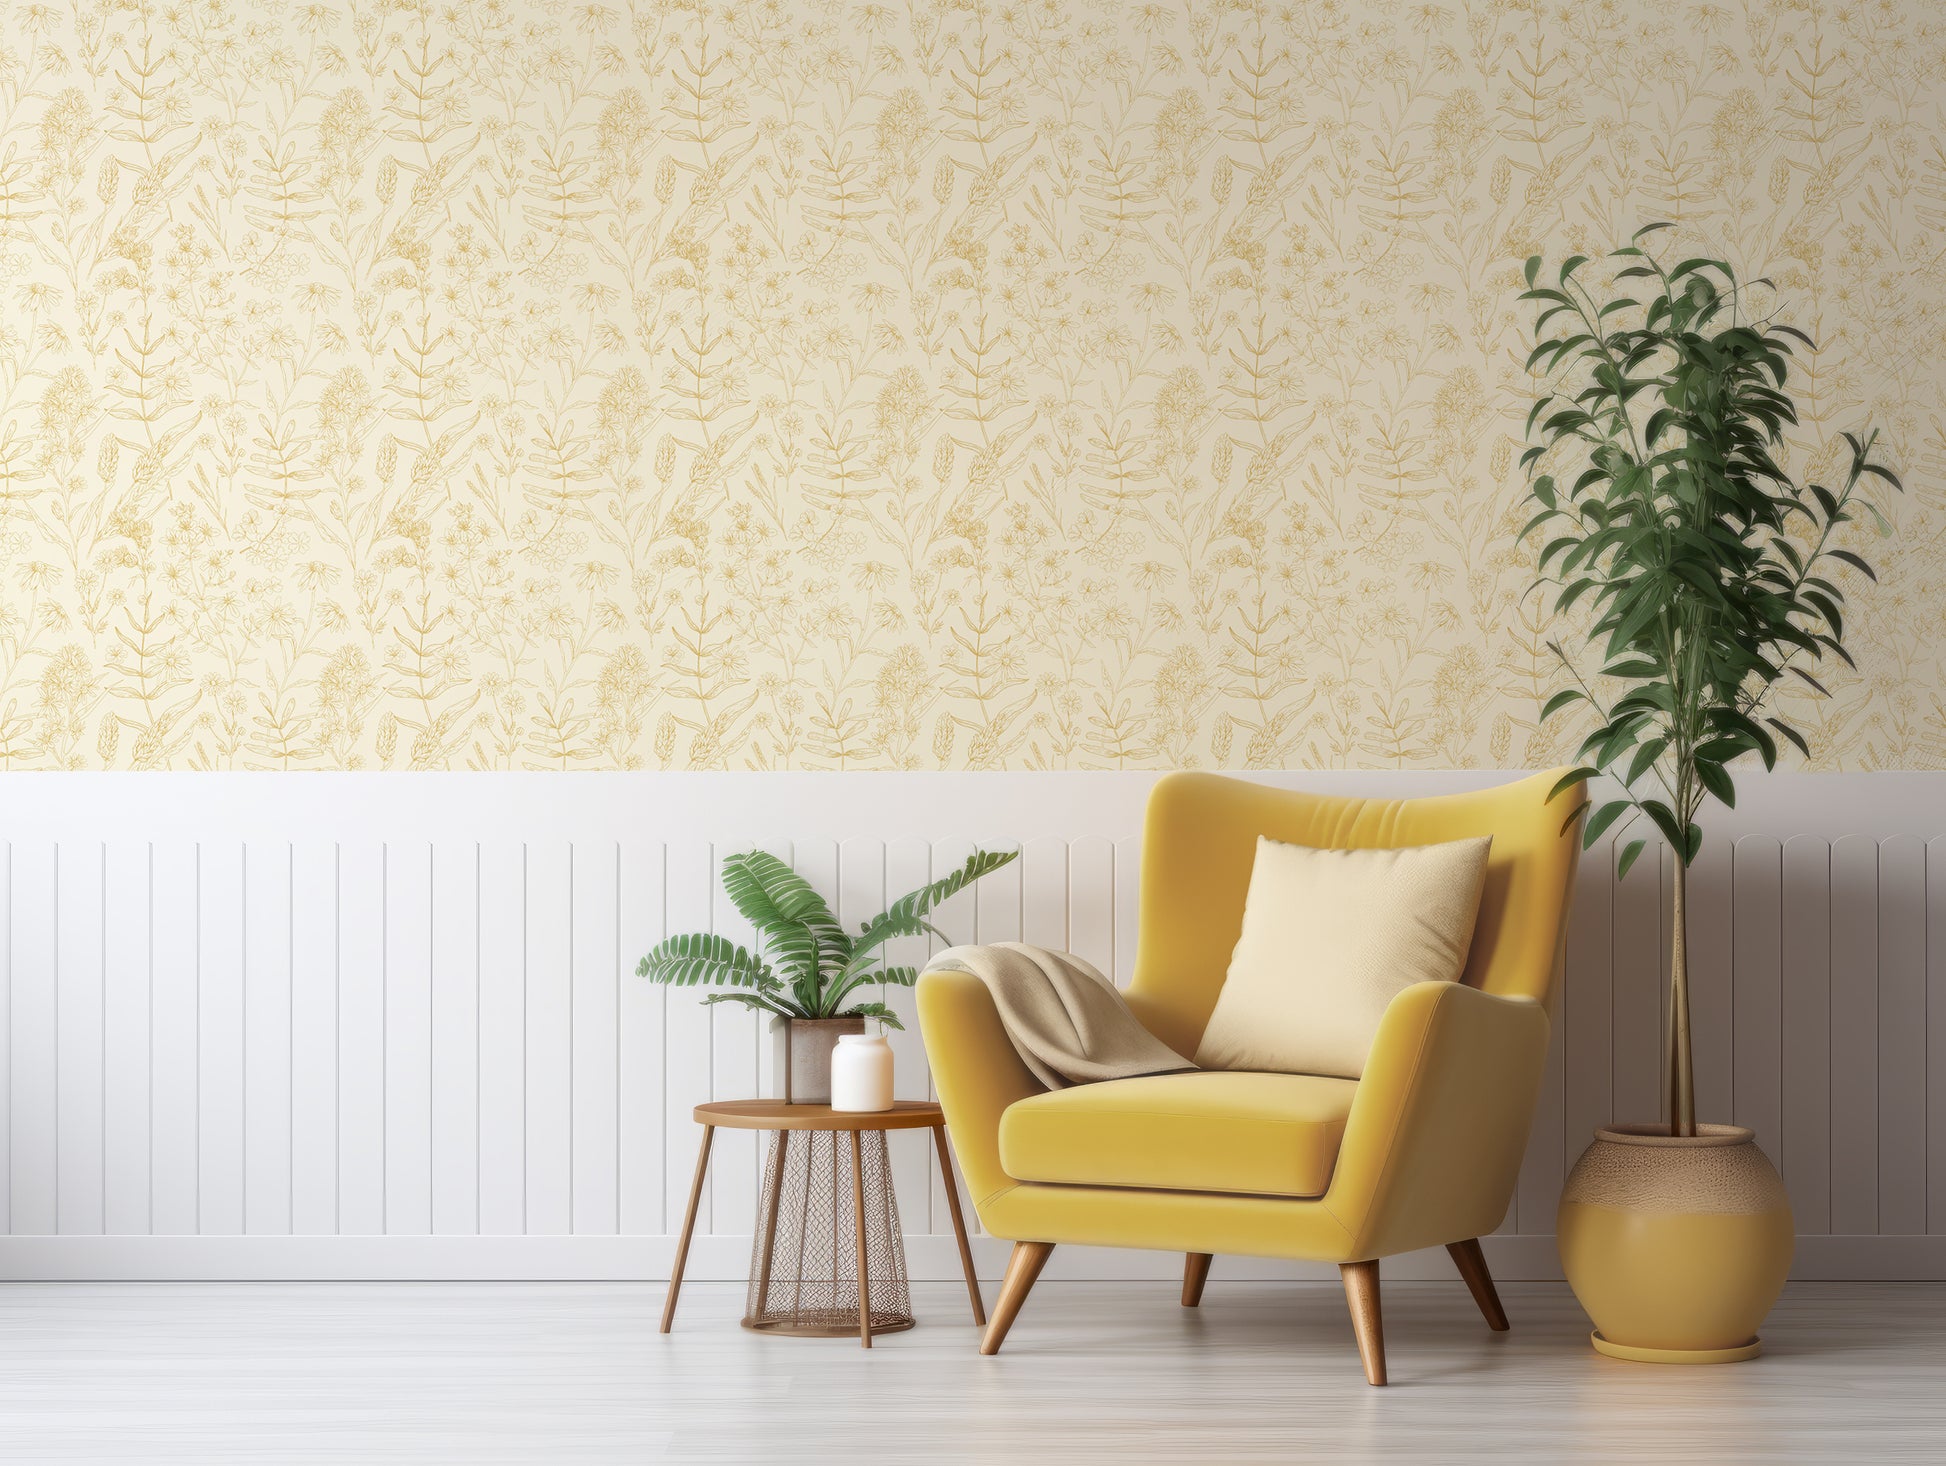 Carmen Wallpaper In Room With Mustard Yellow Chair And White Panelled Wall